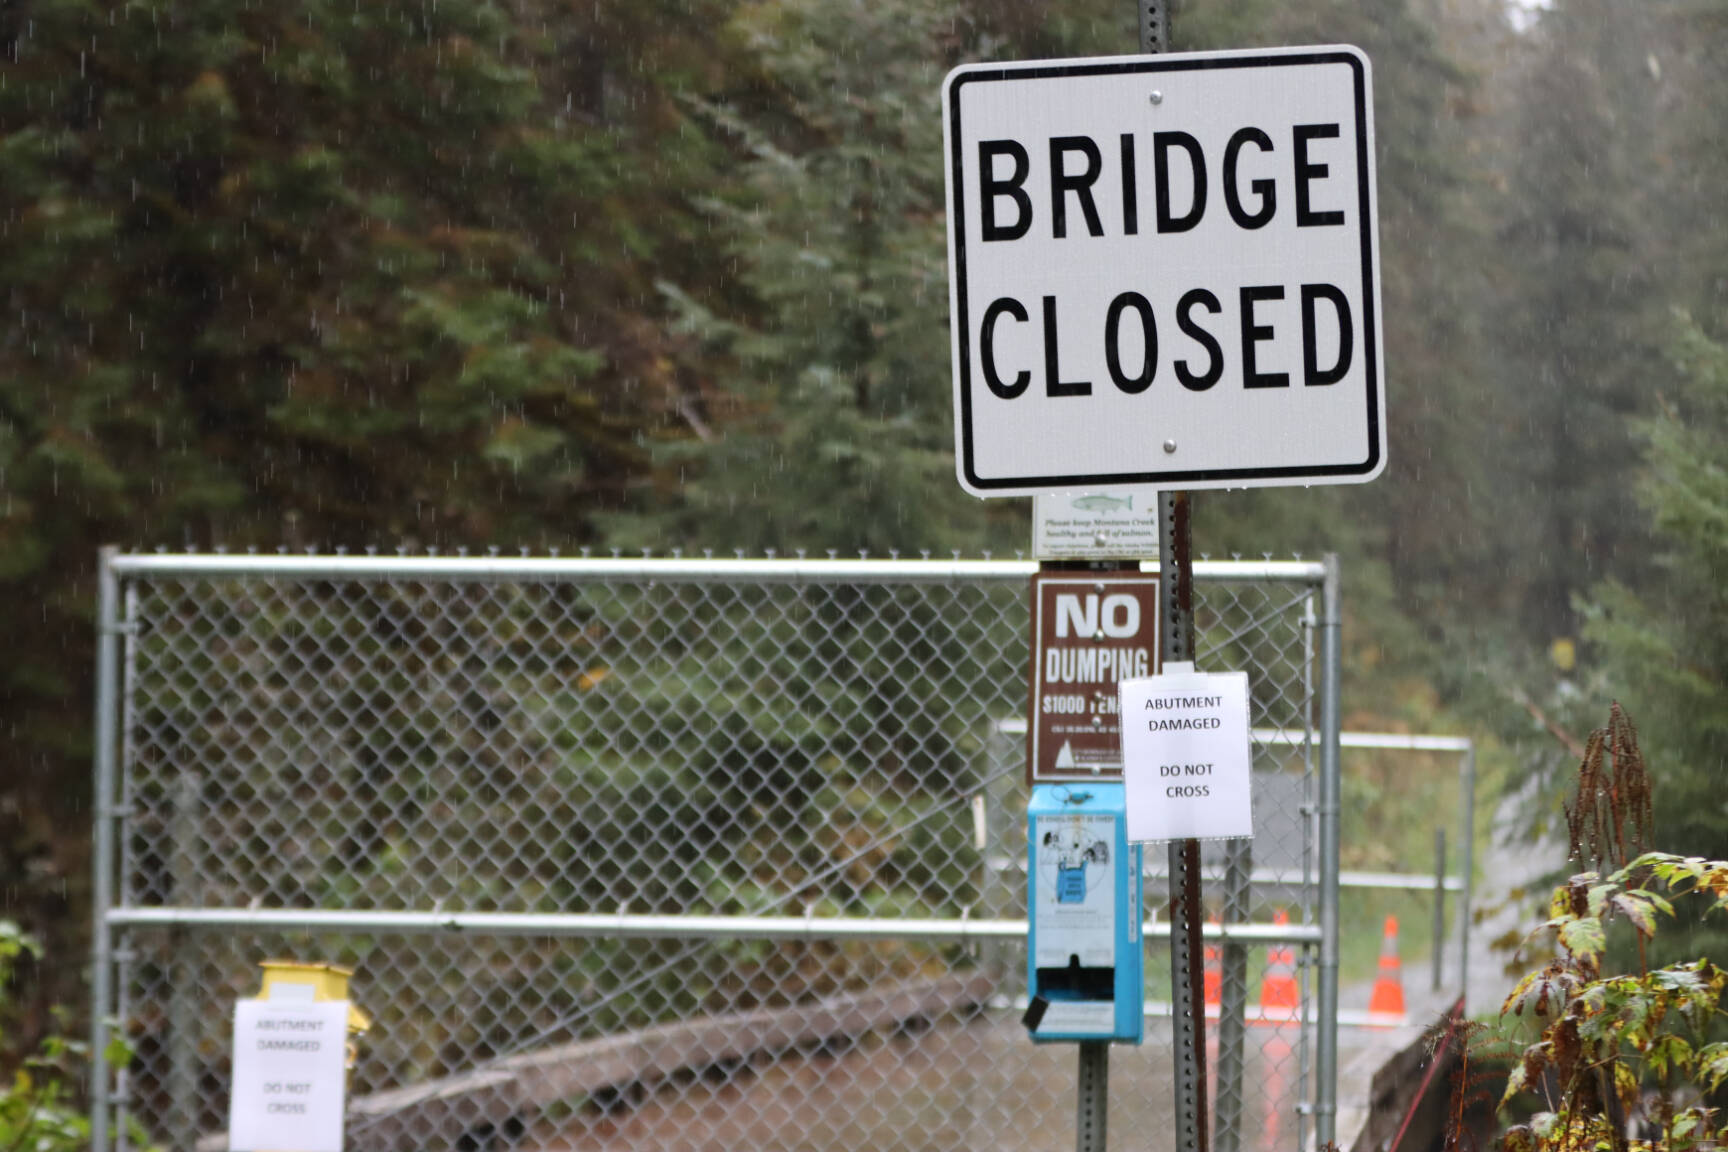 After weeks of heavy rainfall, multiple portions of the Montana Creek Bridge were closed after sustaining weather-related damage. (Jonson Kuhn / Juneau Empire)